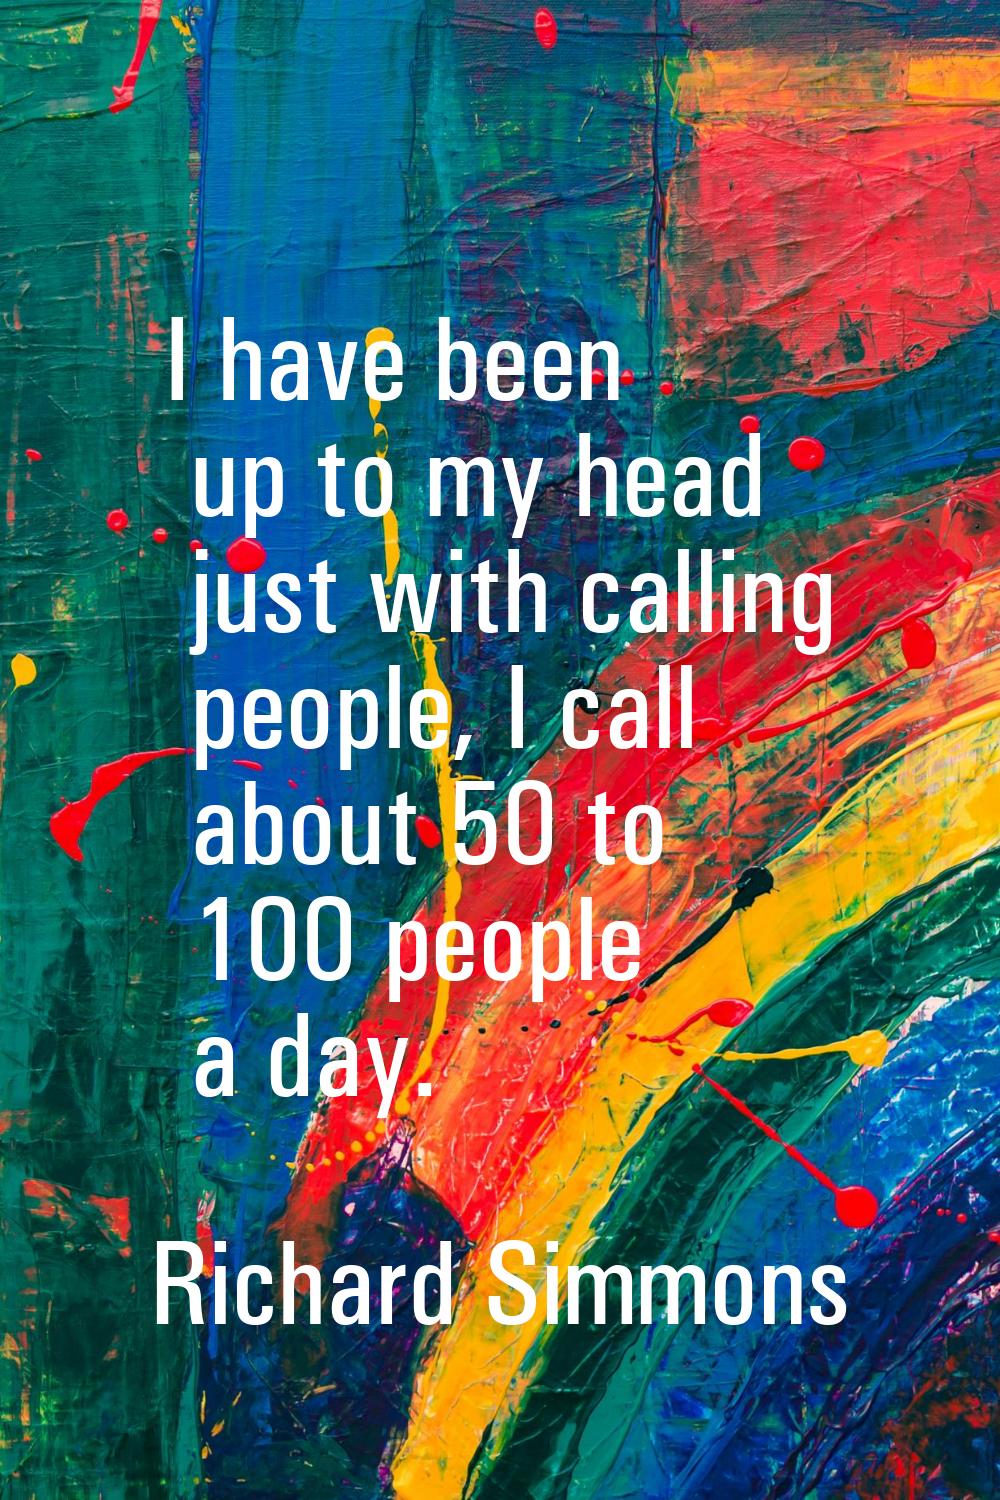 I have been up to my head just with calling people, I call about 50 to 100 people a day.